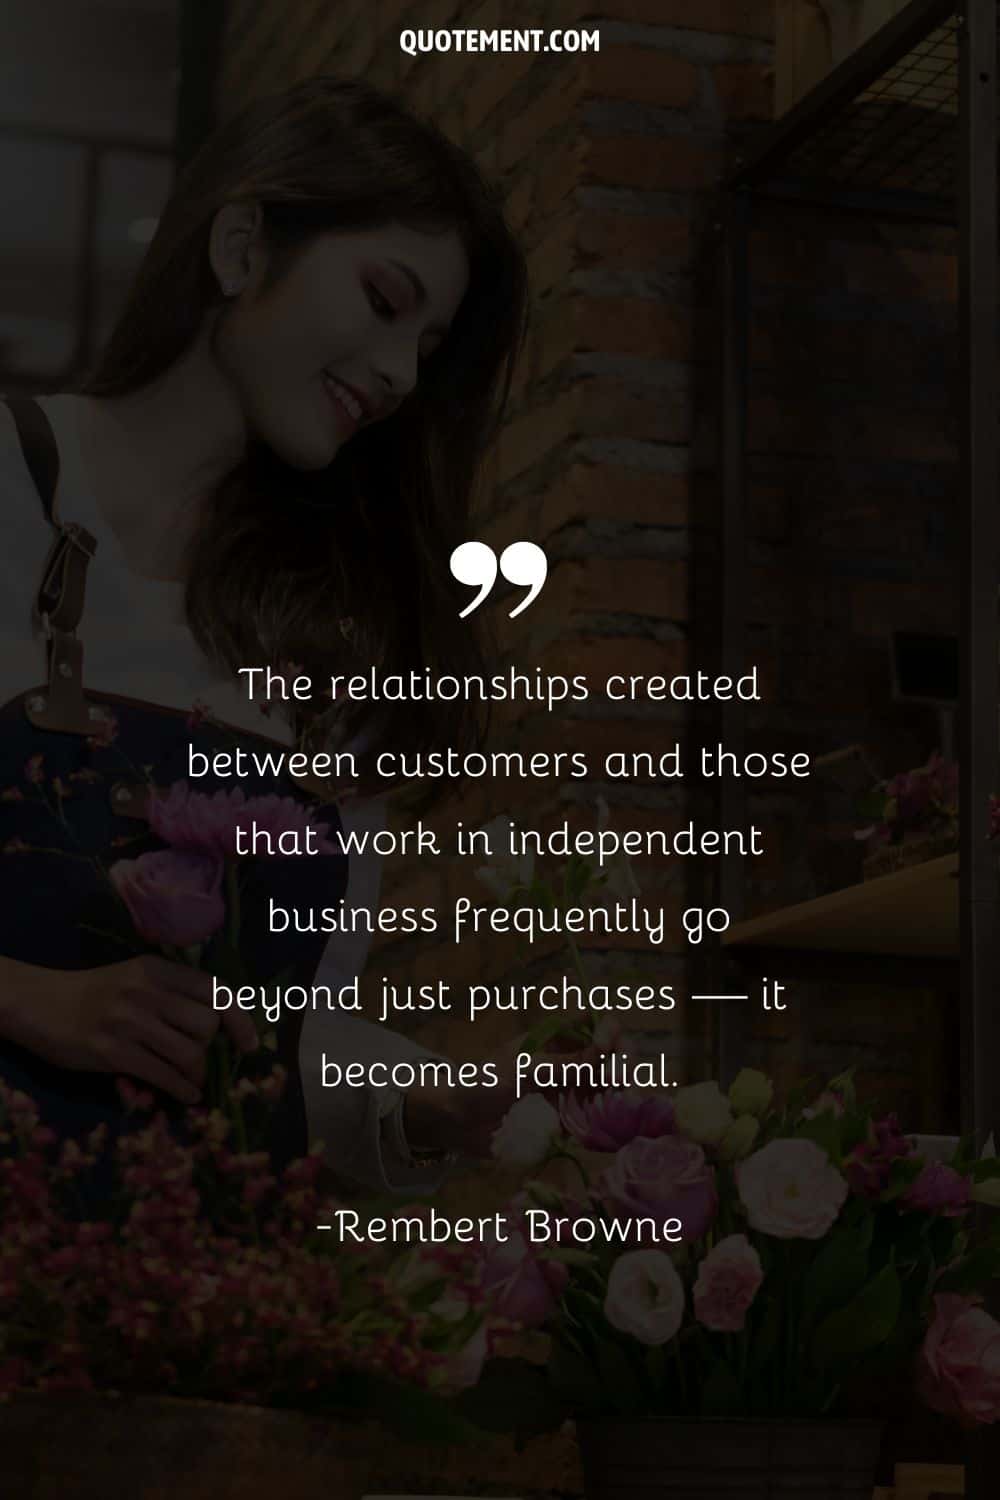 The relationships created between customers and those that work in independent business frequently go beyond just purchases